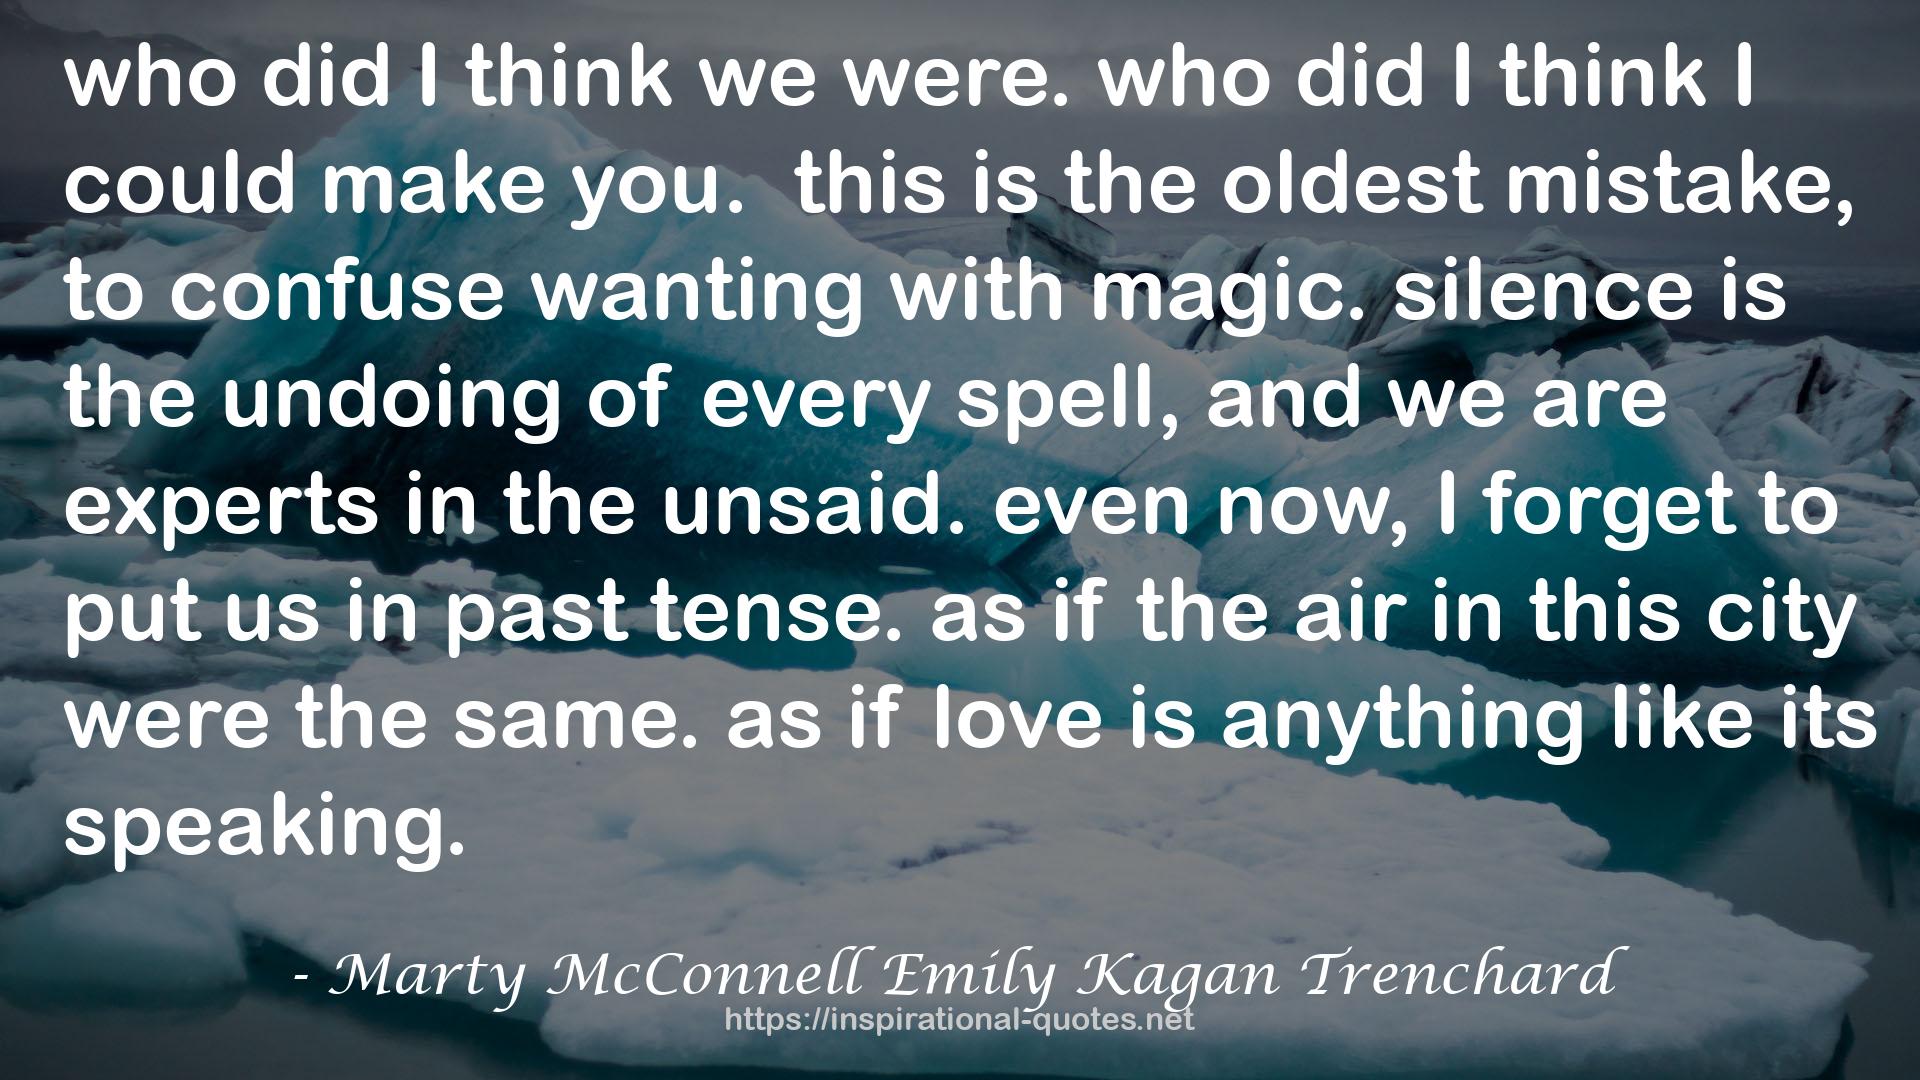 Marty McConnell Emily Kagan Trenchard QUOTES